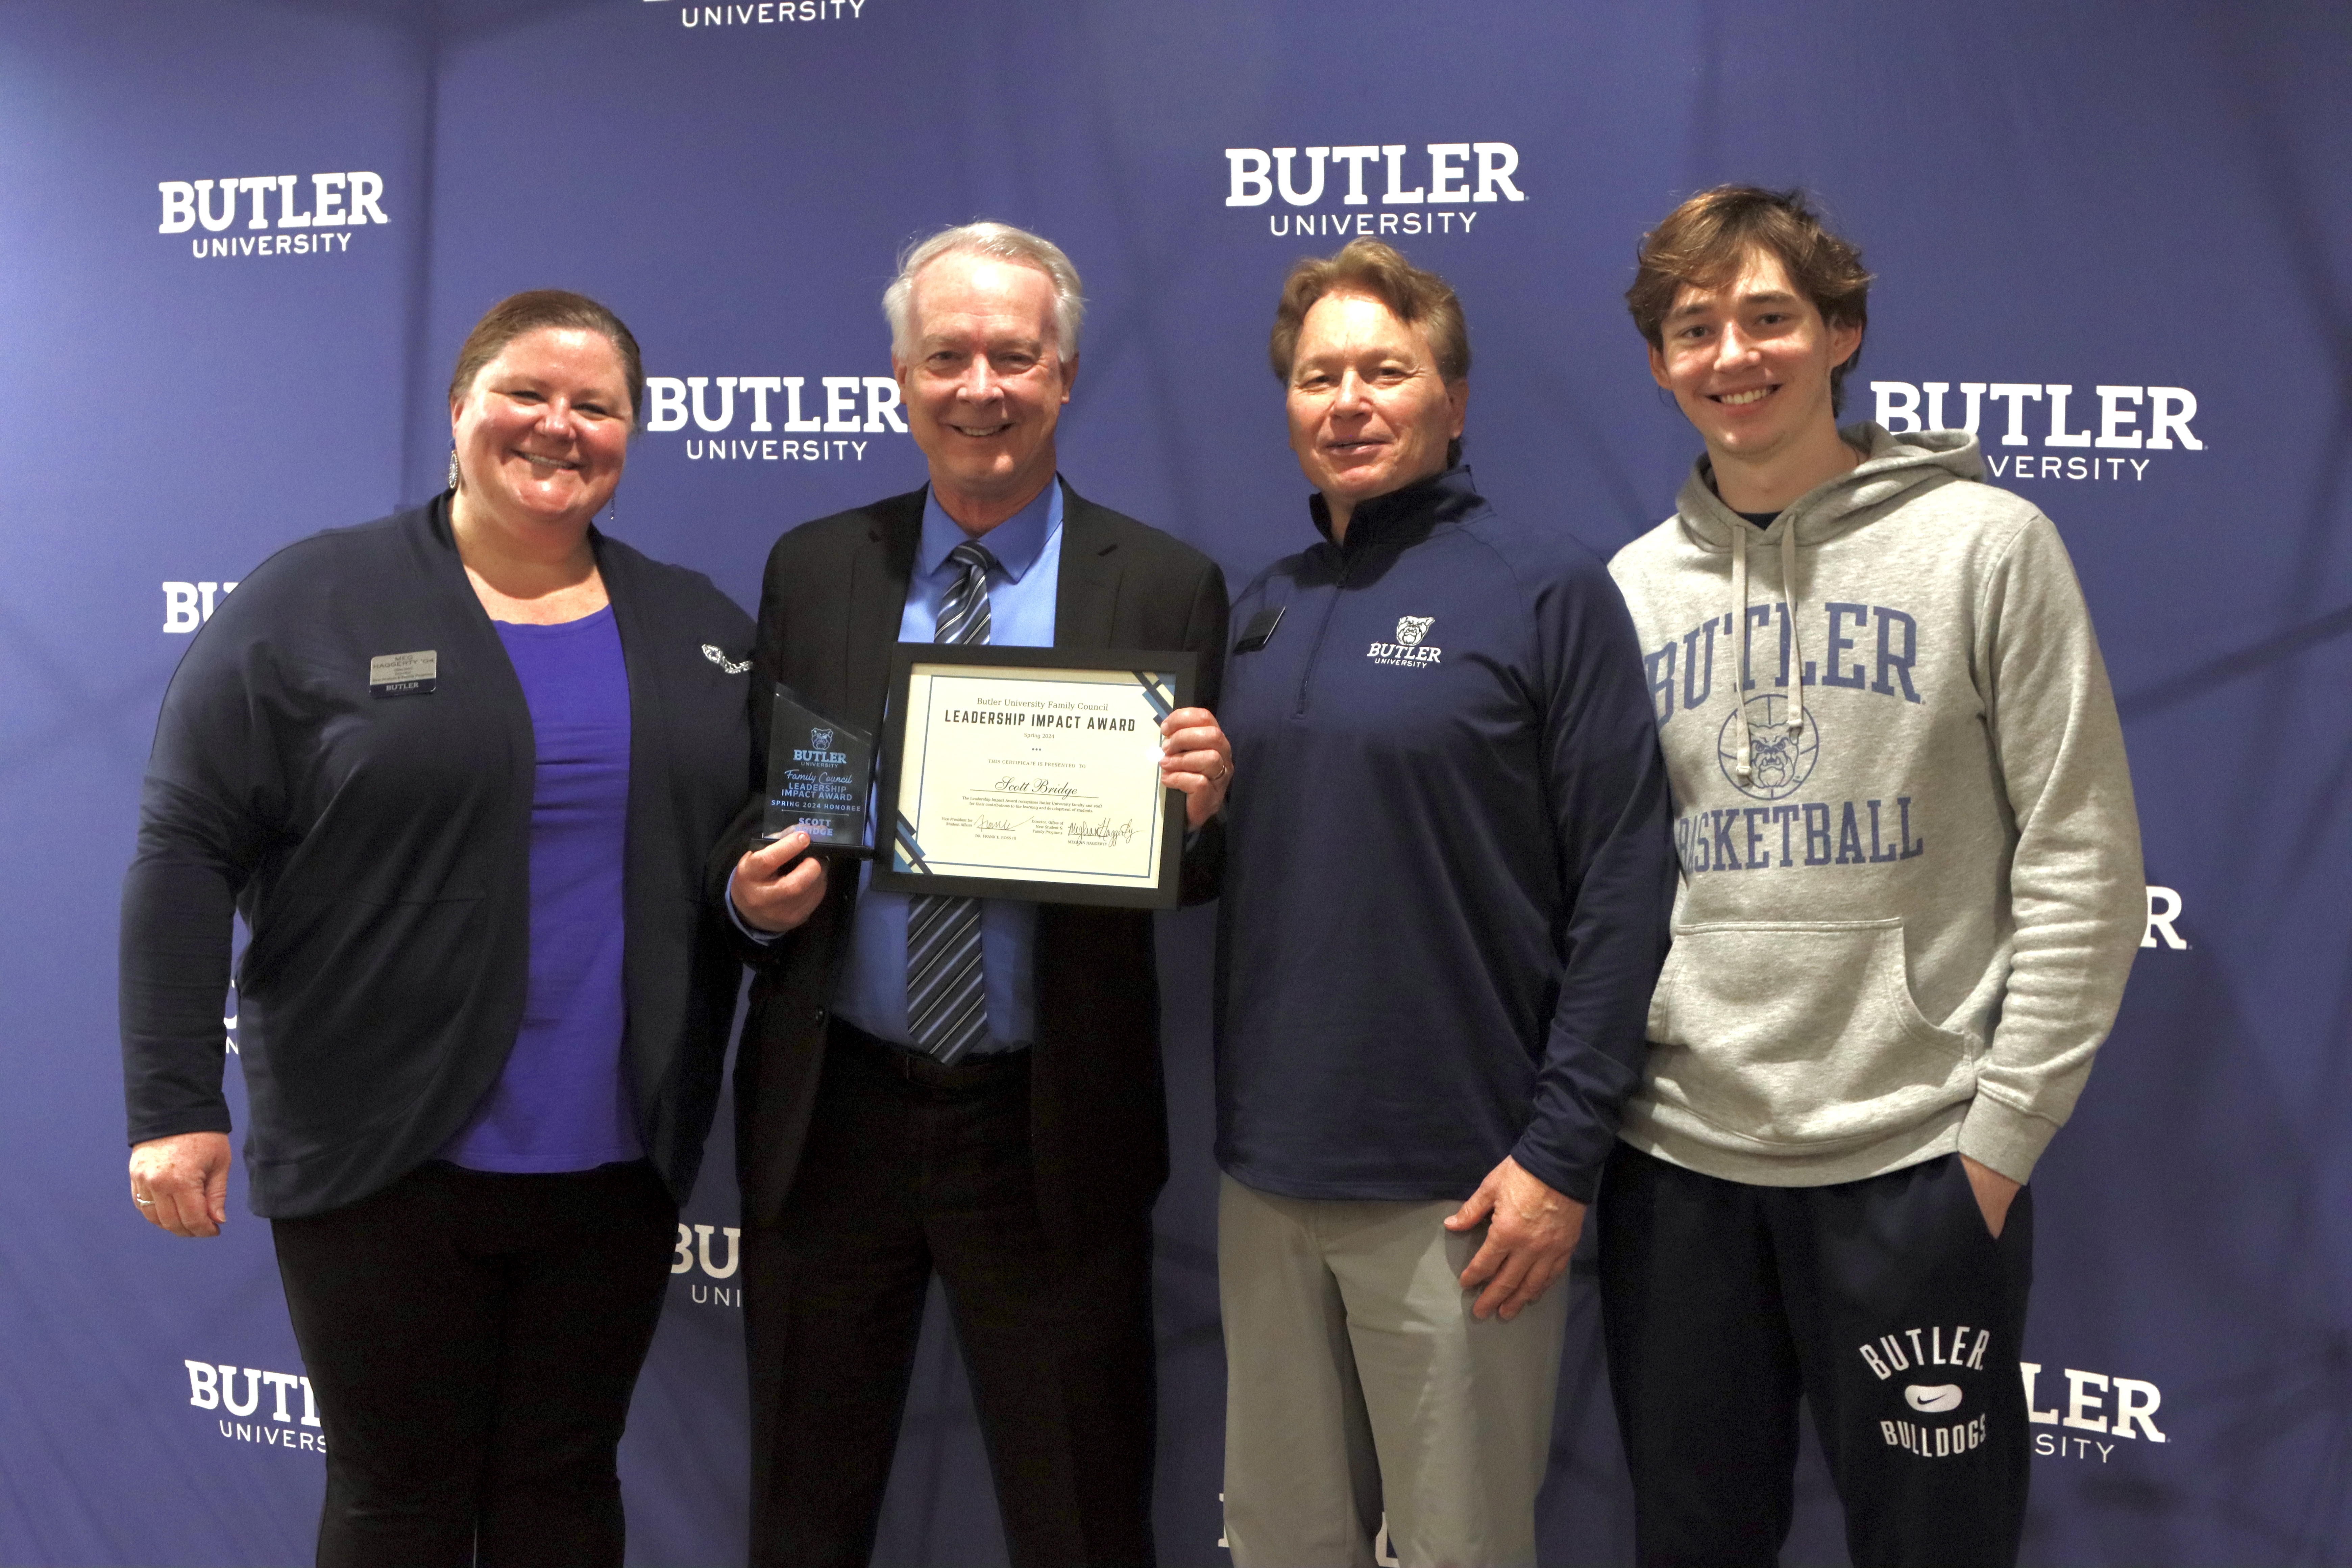 Professor Scott Bridges poses with his certificate and trophy alongside Director of New Student & Family Programs Meg Haggerty (left) and nominating family Glen Danahey and student Brock Danahey (right). Butler University backdrop with four people posing in front. Scott Bridge holding his certificate and trophy.